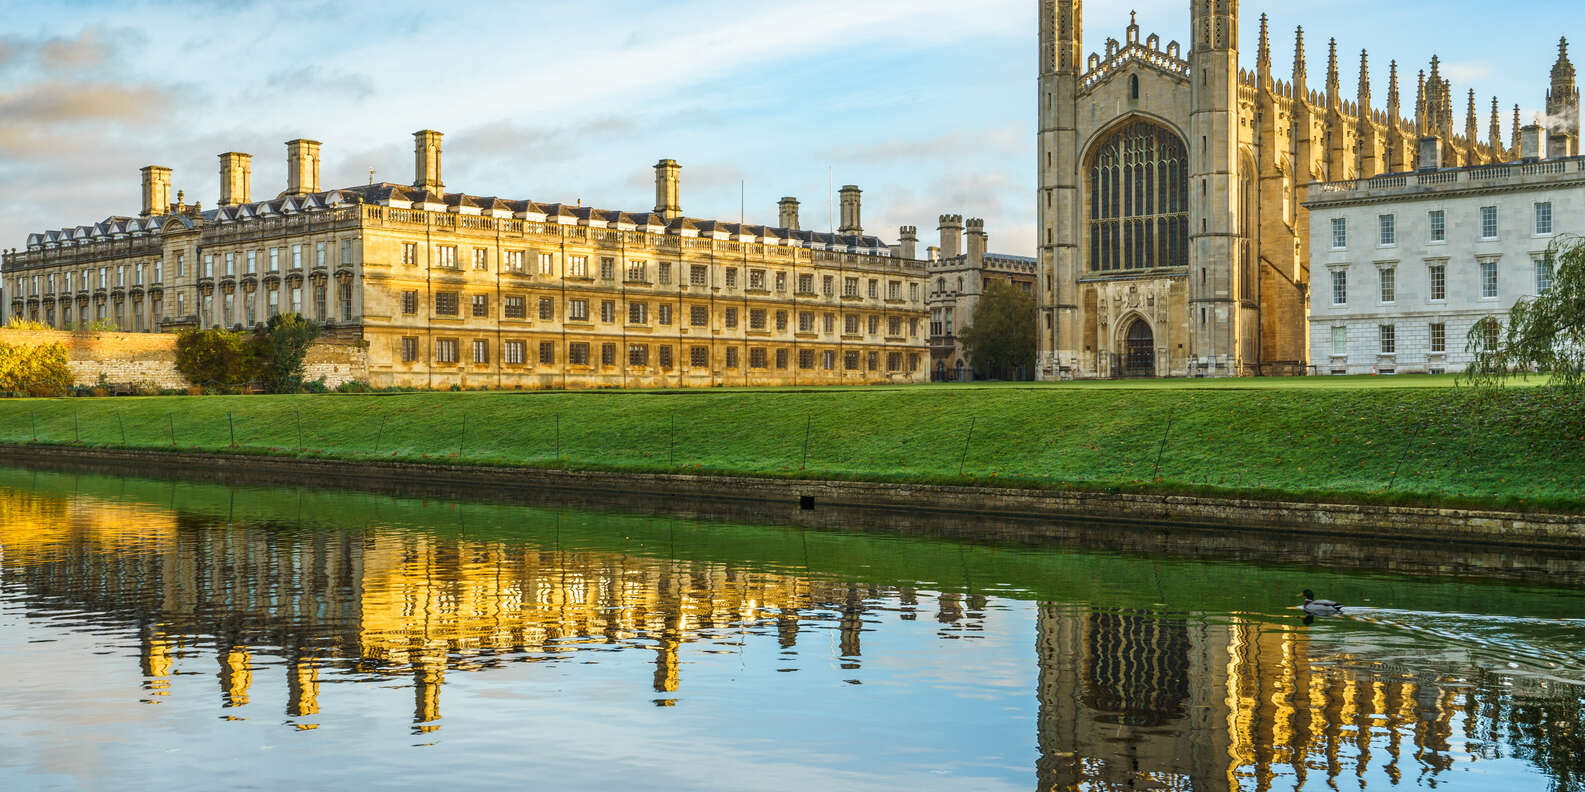 What to do in Cambridge, UK